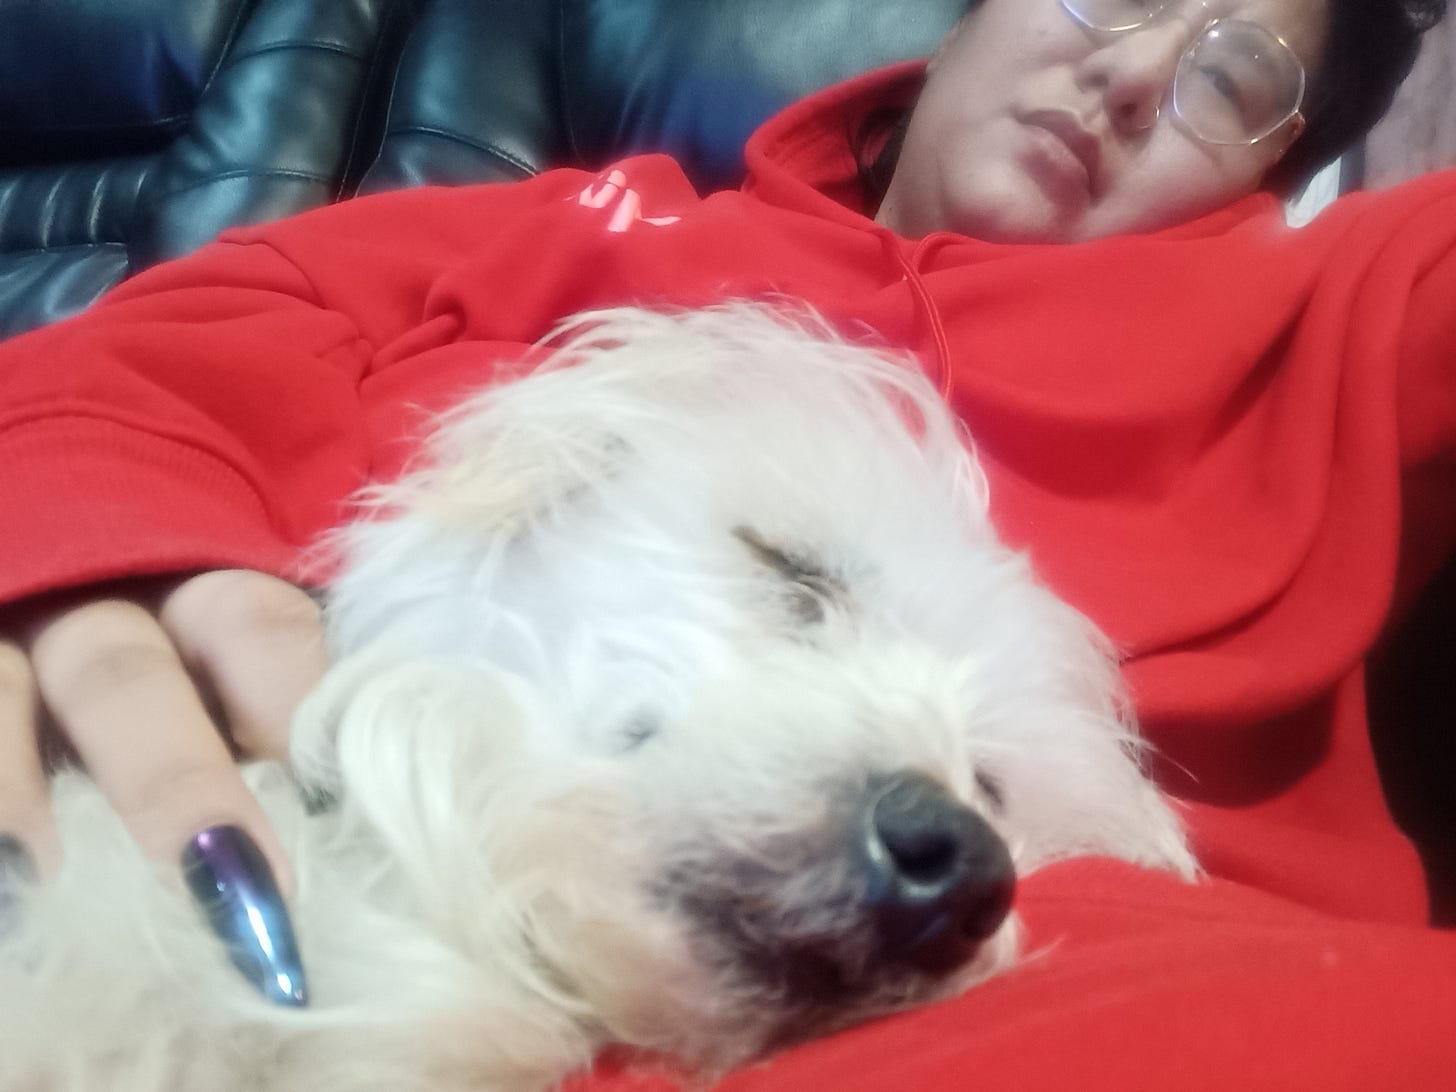 A brown person in glasses and a red Yitty hoodie has Donut, a white, puppy-sized Maltese mix in their lap. Donut has long white fur, and is smiling slightly with his eyes closed.